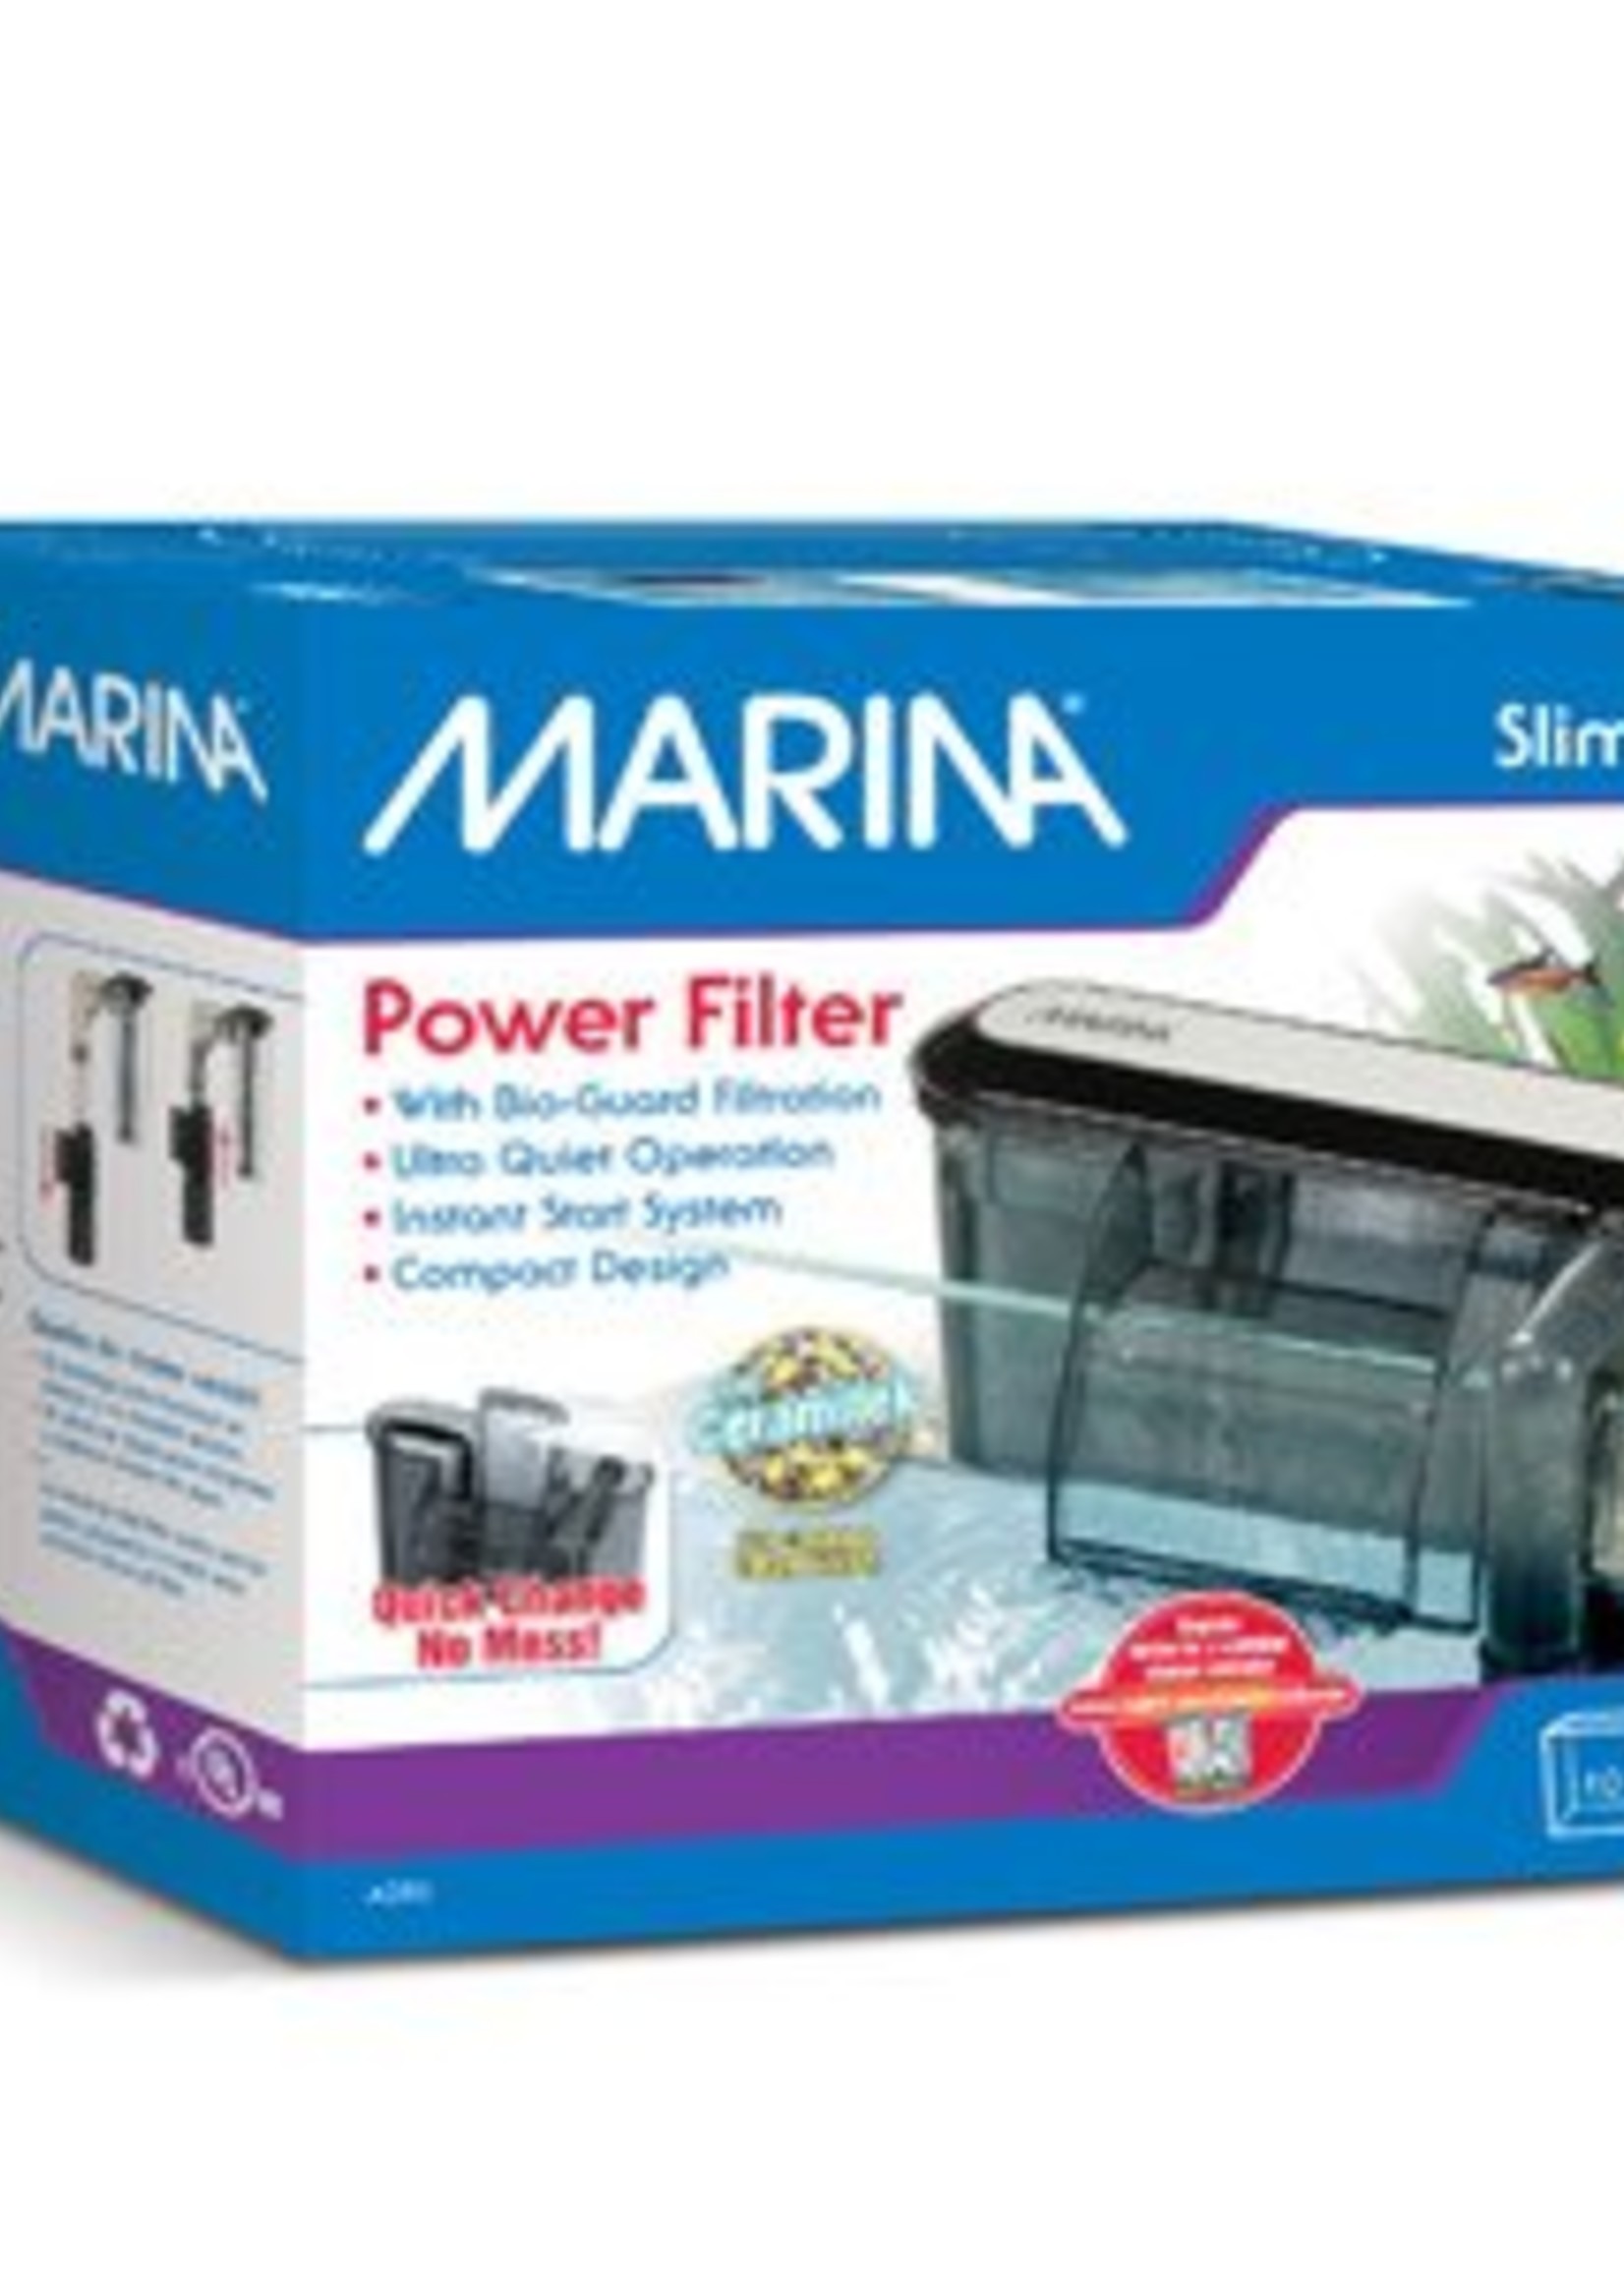 Slim Filter S10 For Aquariums up to 38L (10 US Gal)